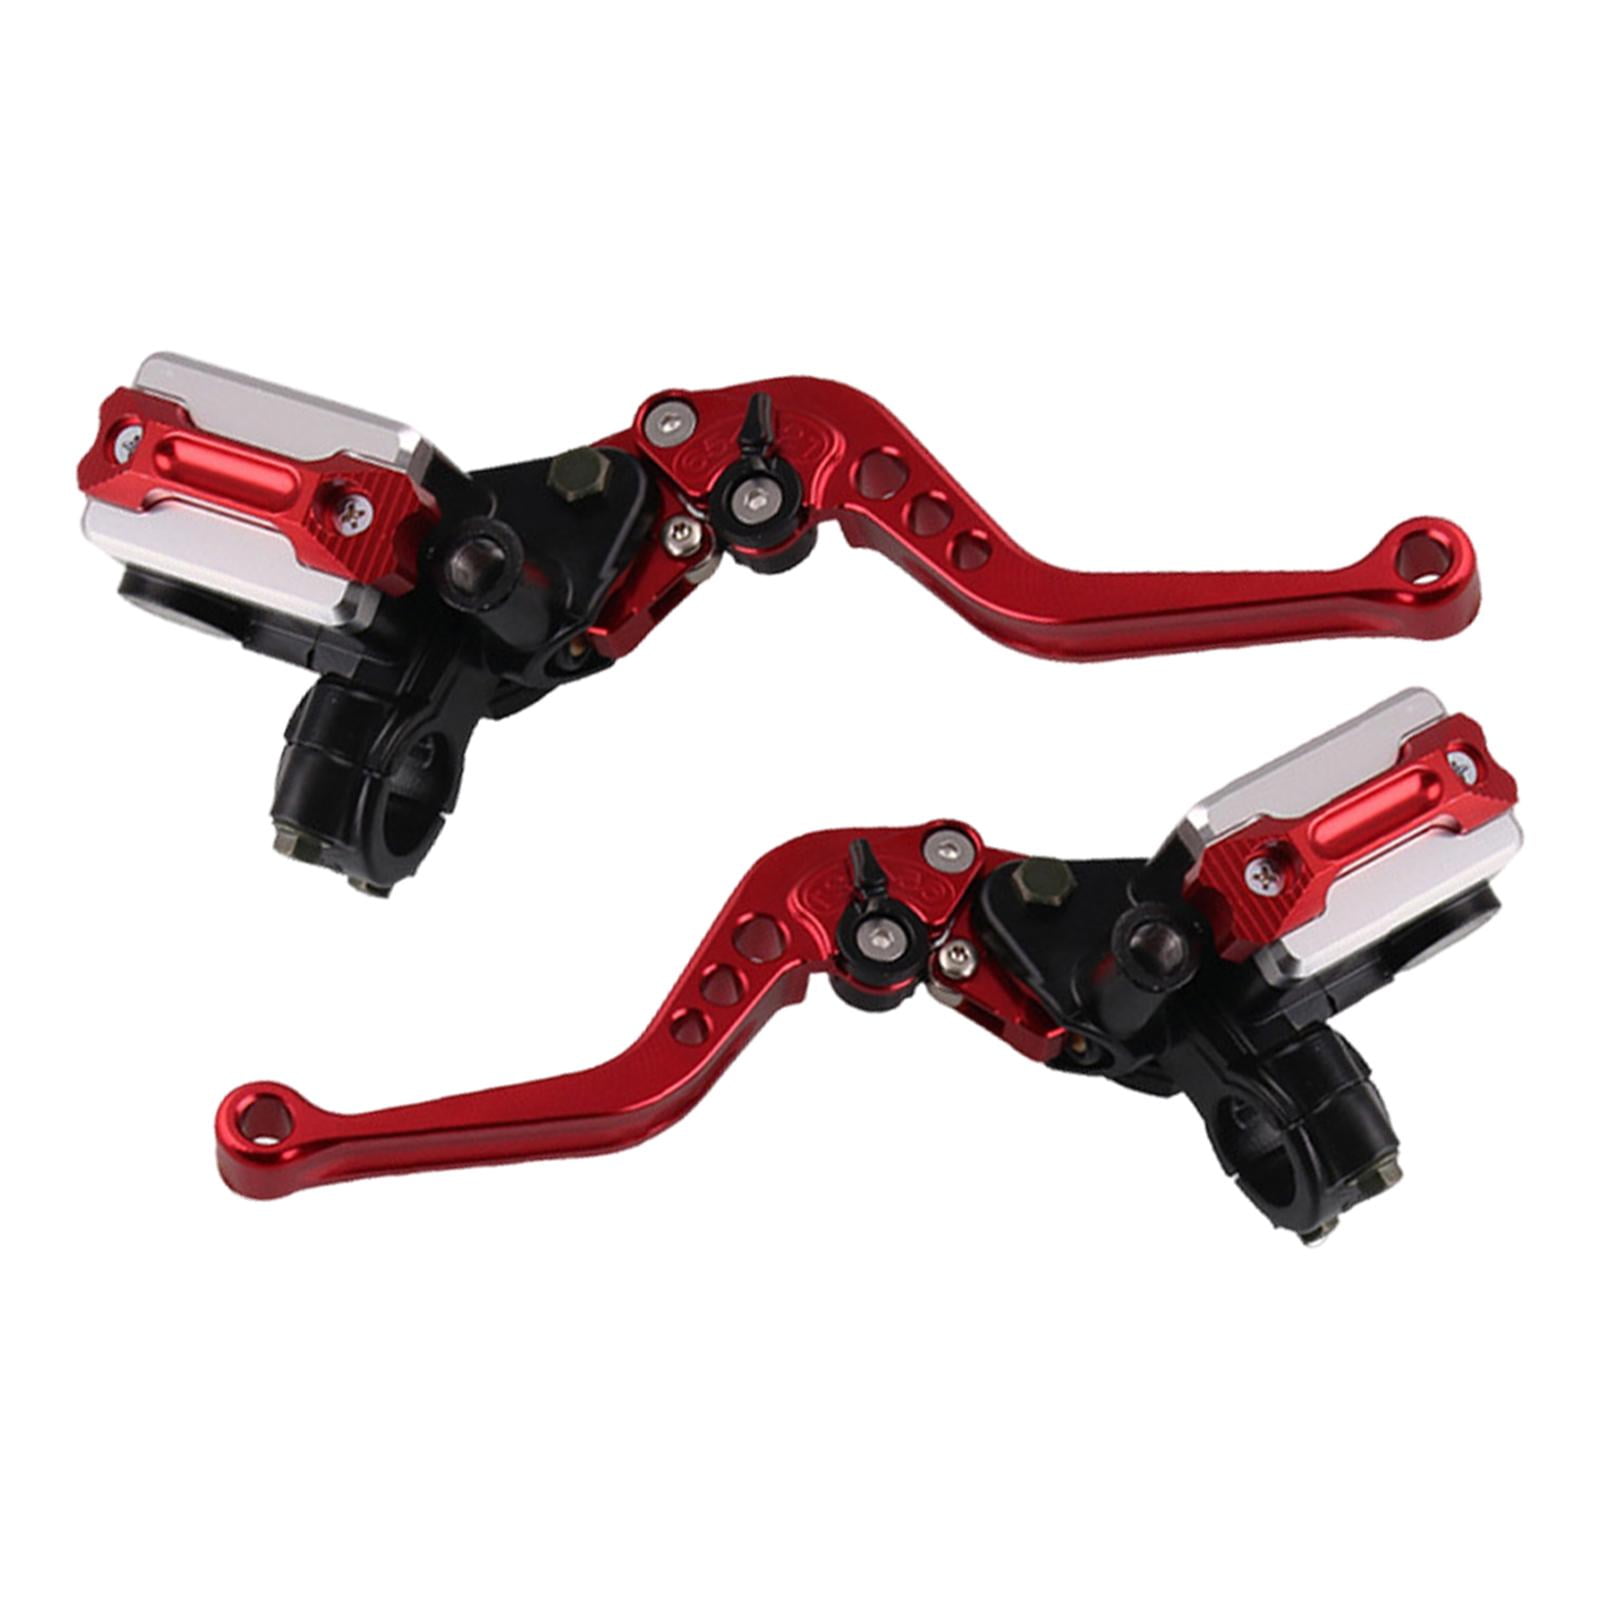 2X 7/8'' 22mm Motorcycle Hydraulic Front Brake Master Cylinder Clutch Lever Red 